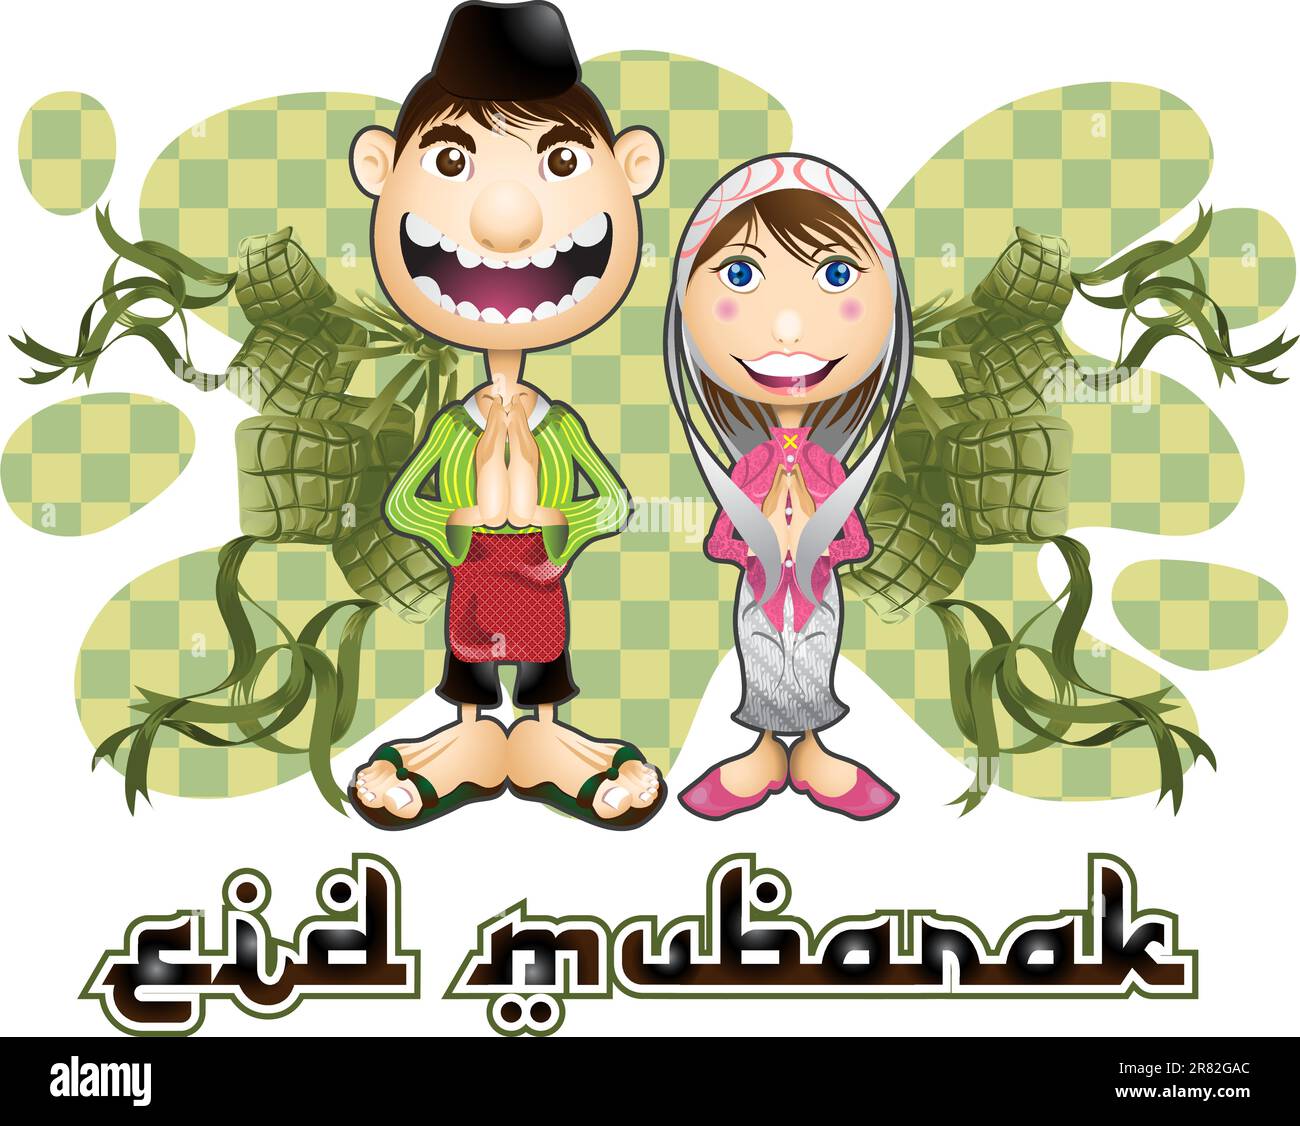 Eid Mubarak is a traditional Muslim greeting reserved for use on the festivals of Eid ul-Adha and Eid ul-Fitr. Stock Vector